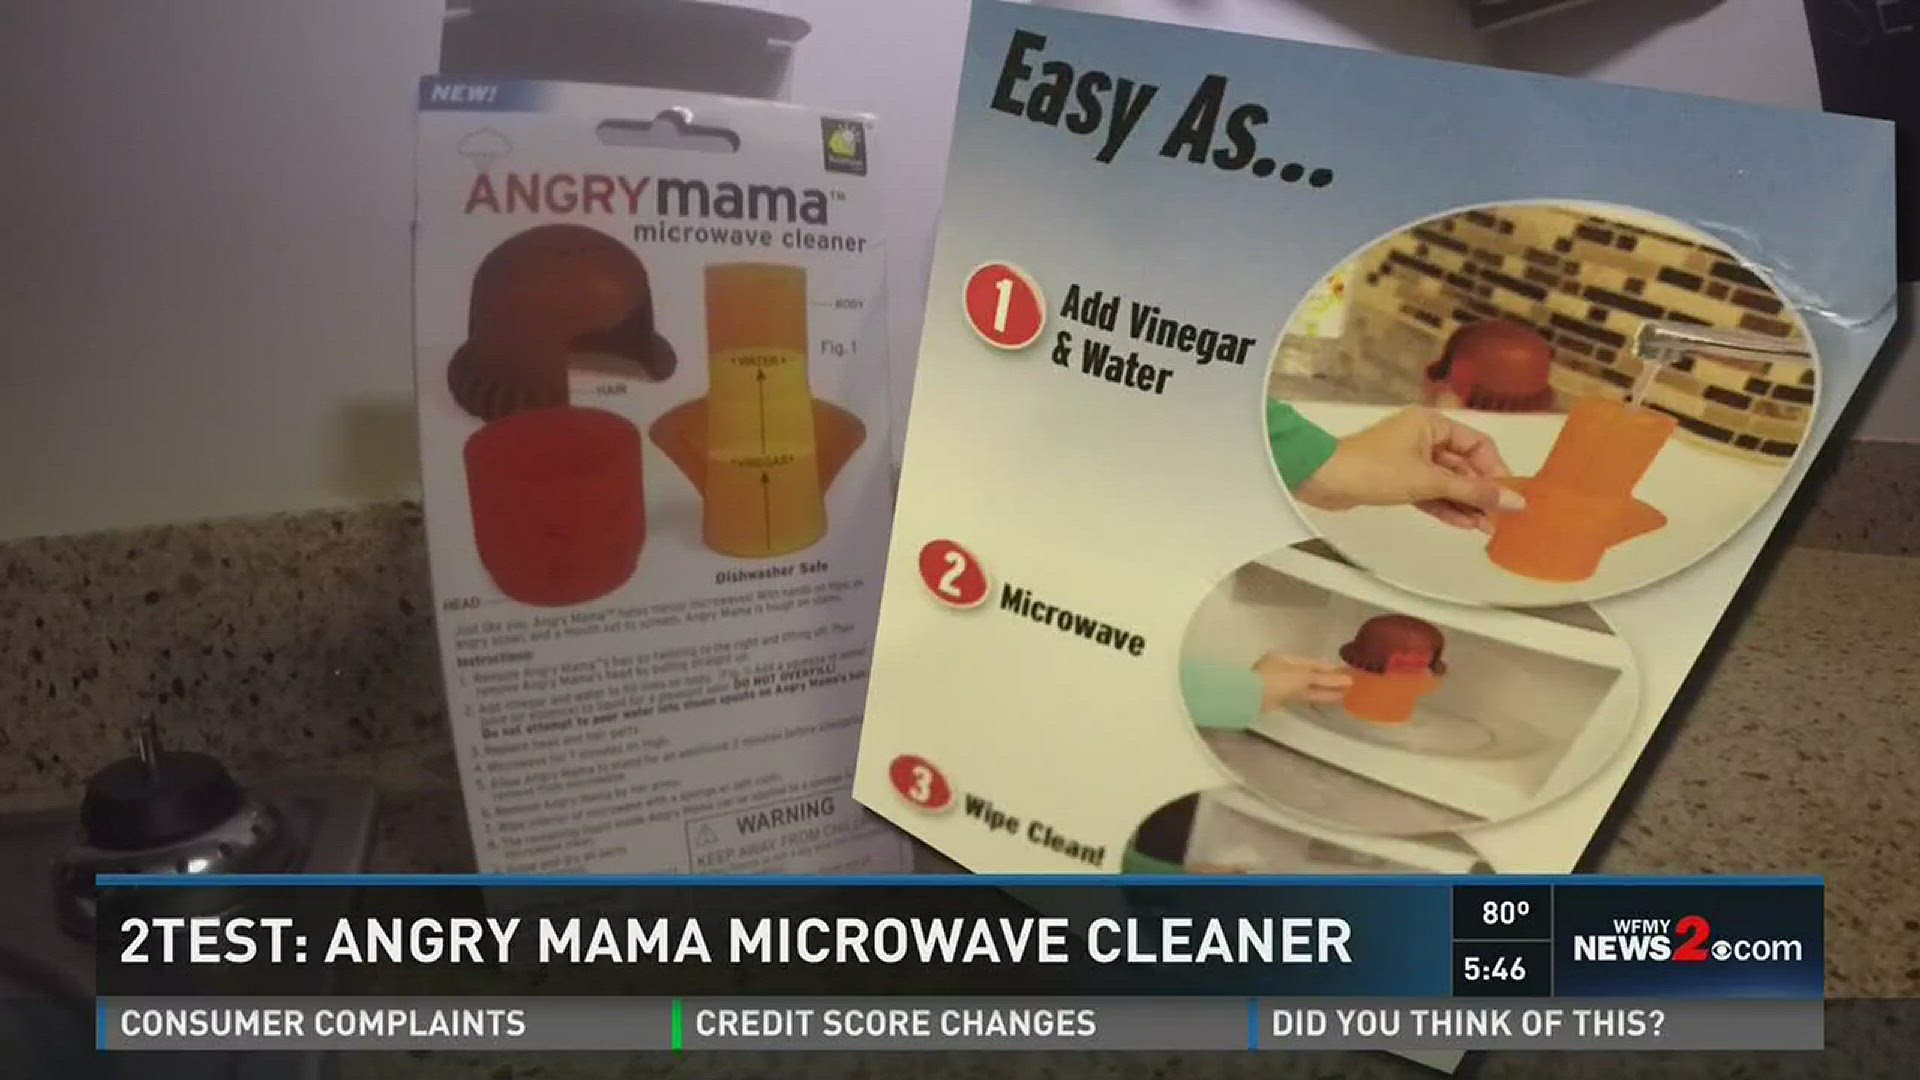 2 Test: Angry Mama Microwave Cleaner